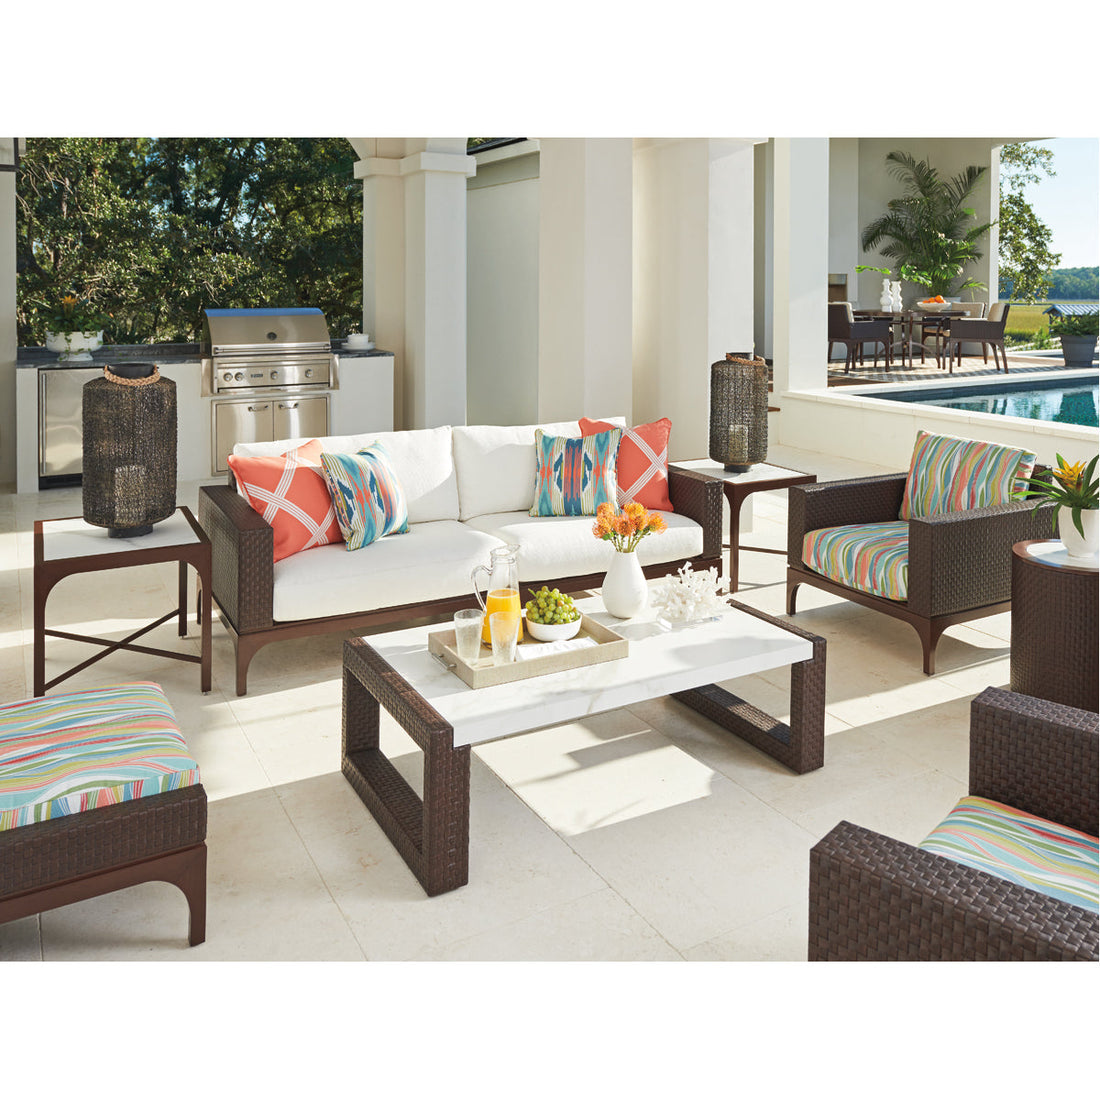 Tommy Bahama Abaco Outdoor End Table